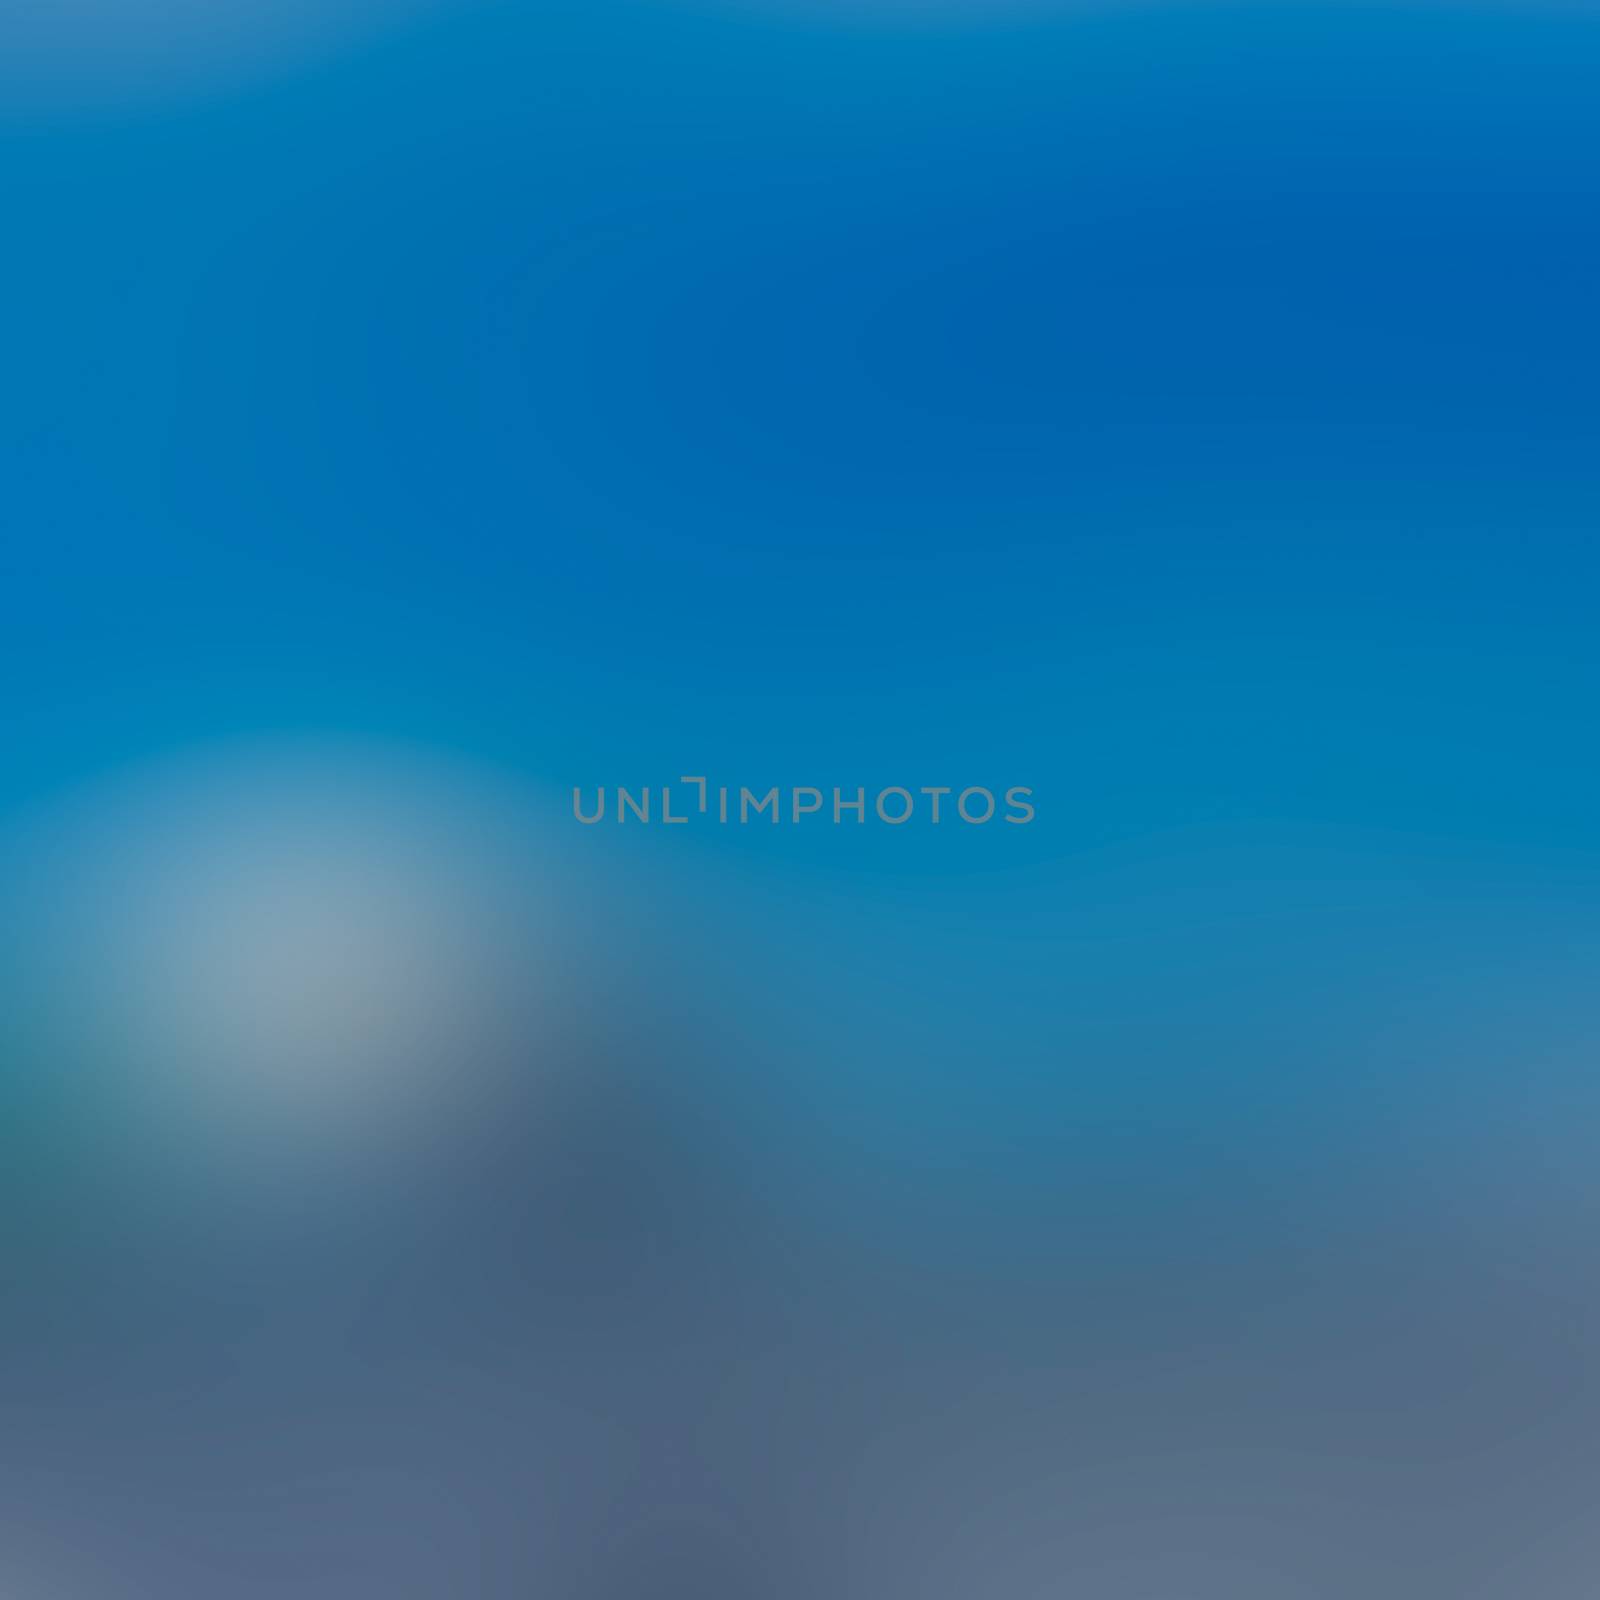 Blue abstract soft blurred nature background. Canvas for any project